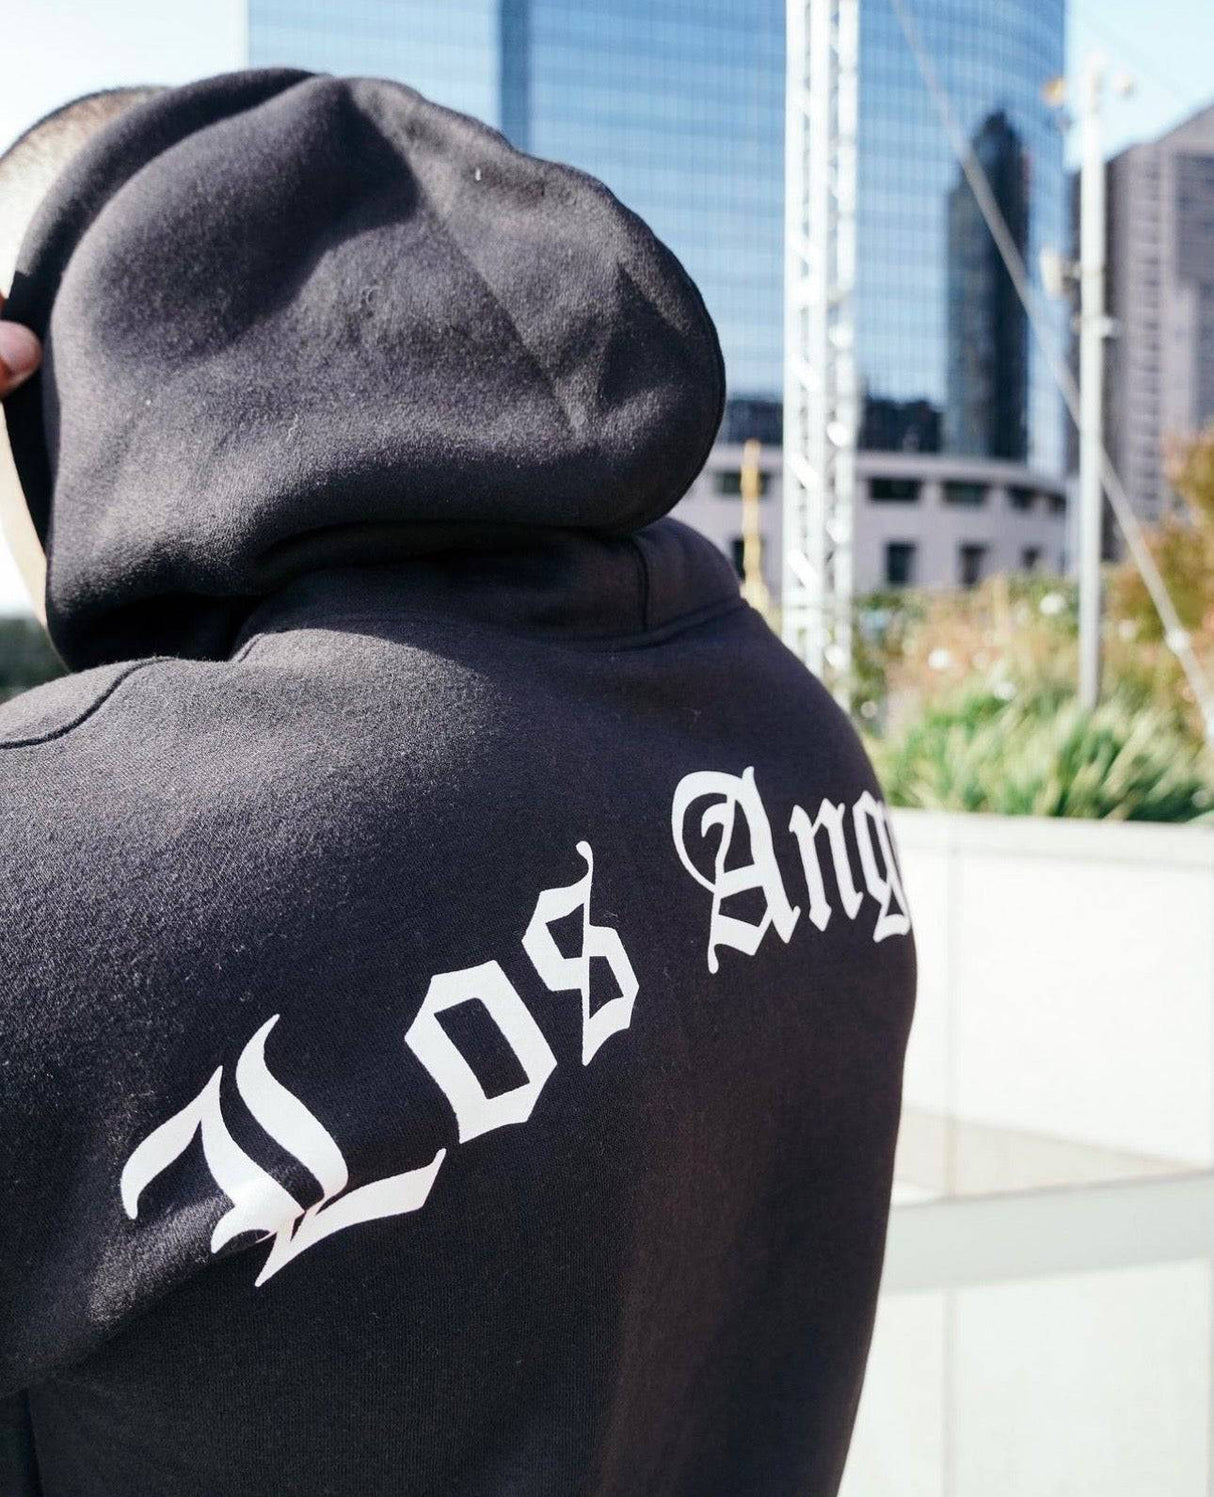 Oversized Los Angeles Hoodie - LGXNDS - Prime Sports Nutrition